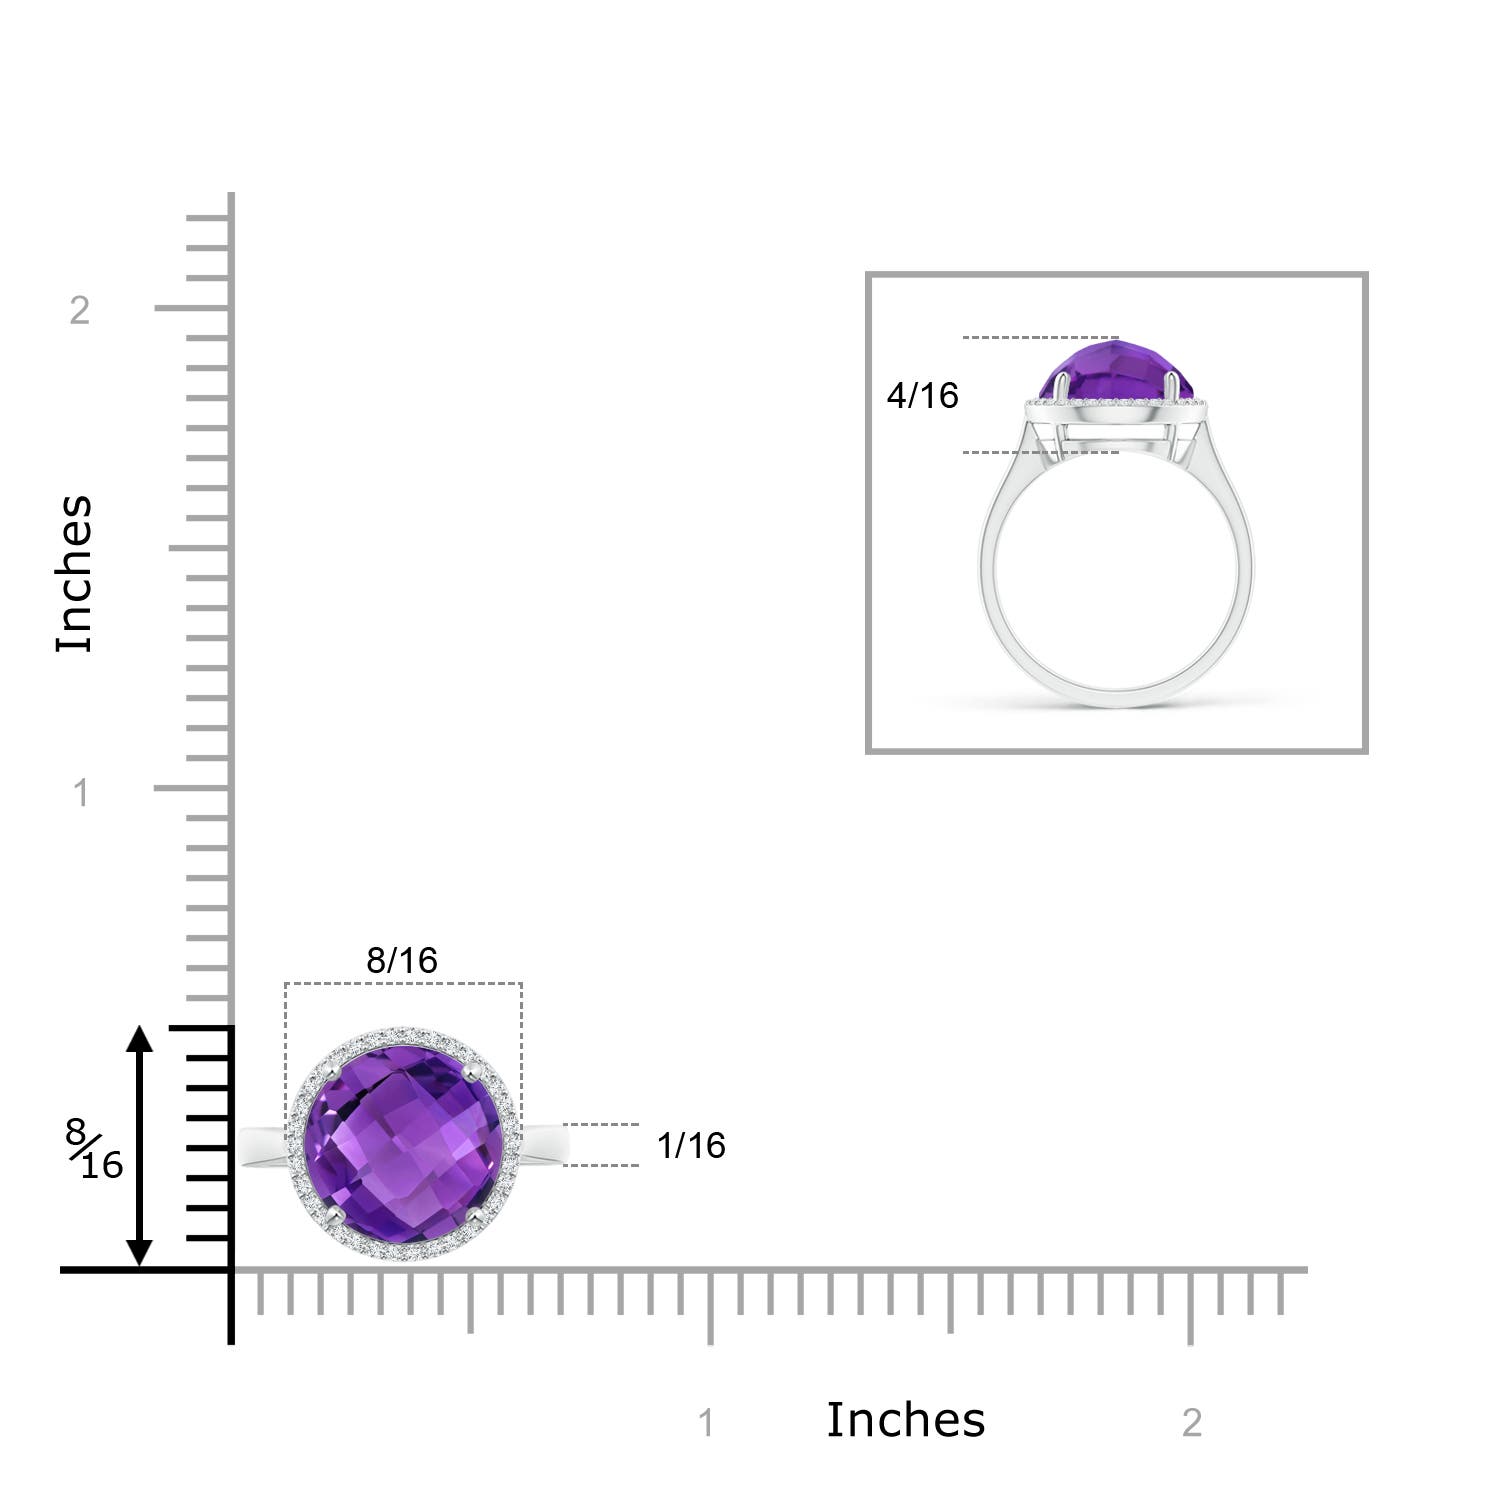 AAA - Amethyst / 3.77 CT / 14 KT White Gold